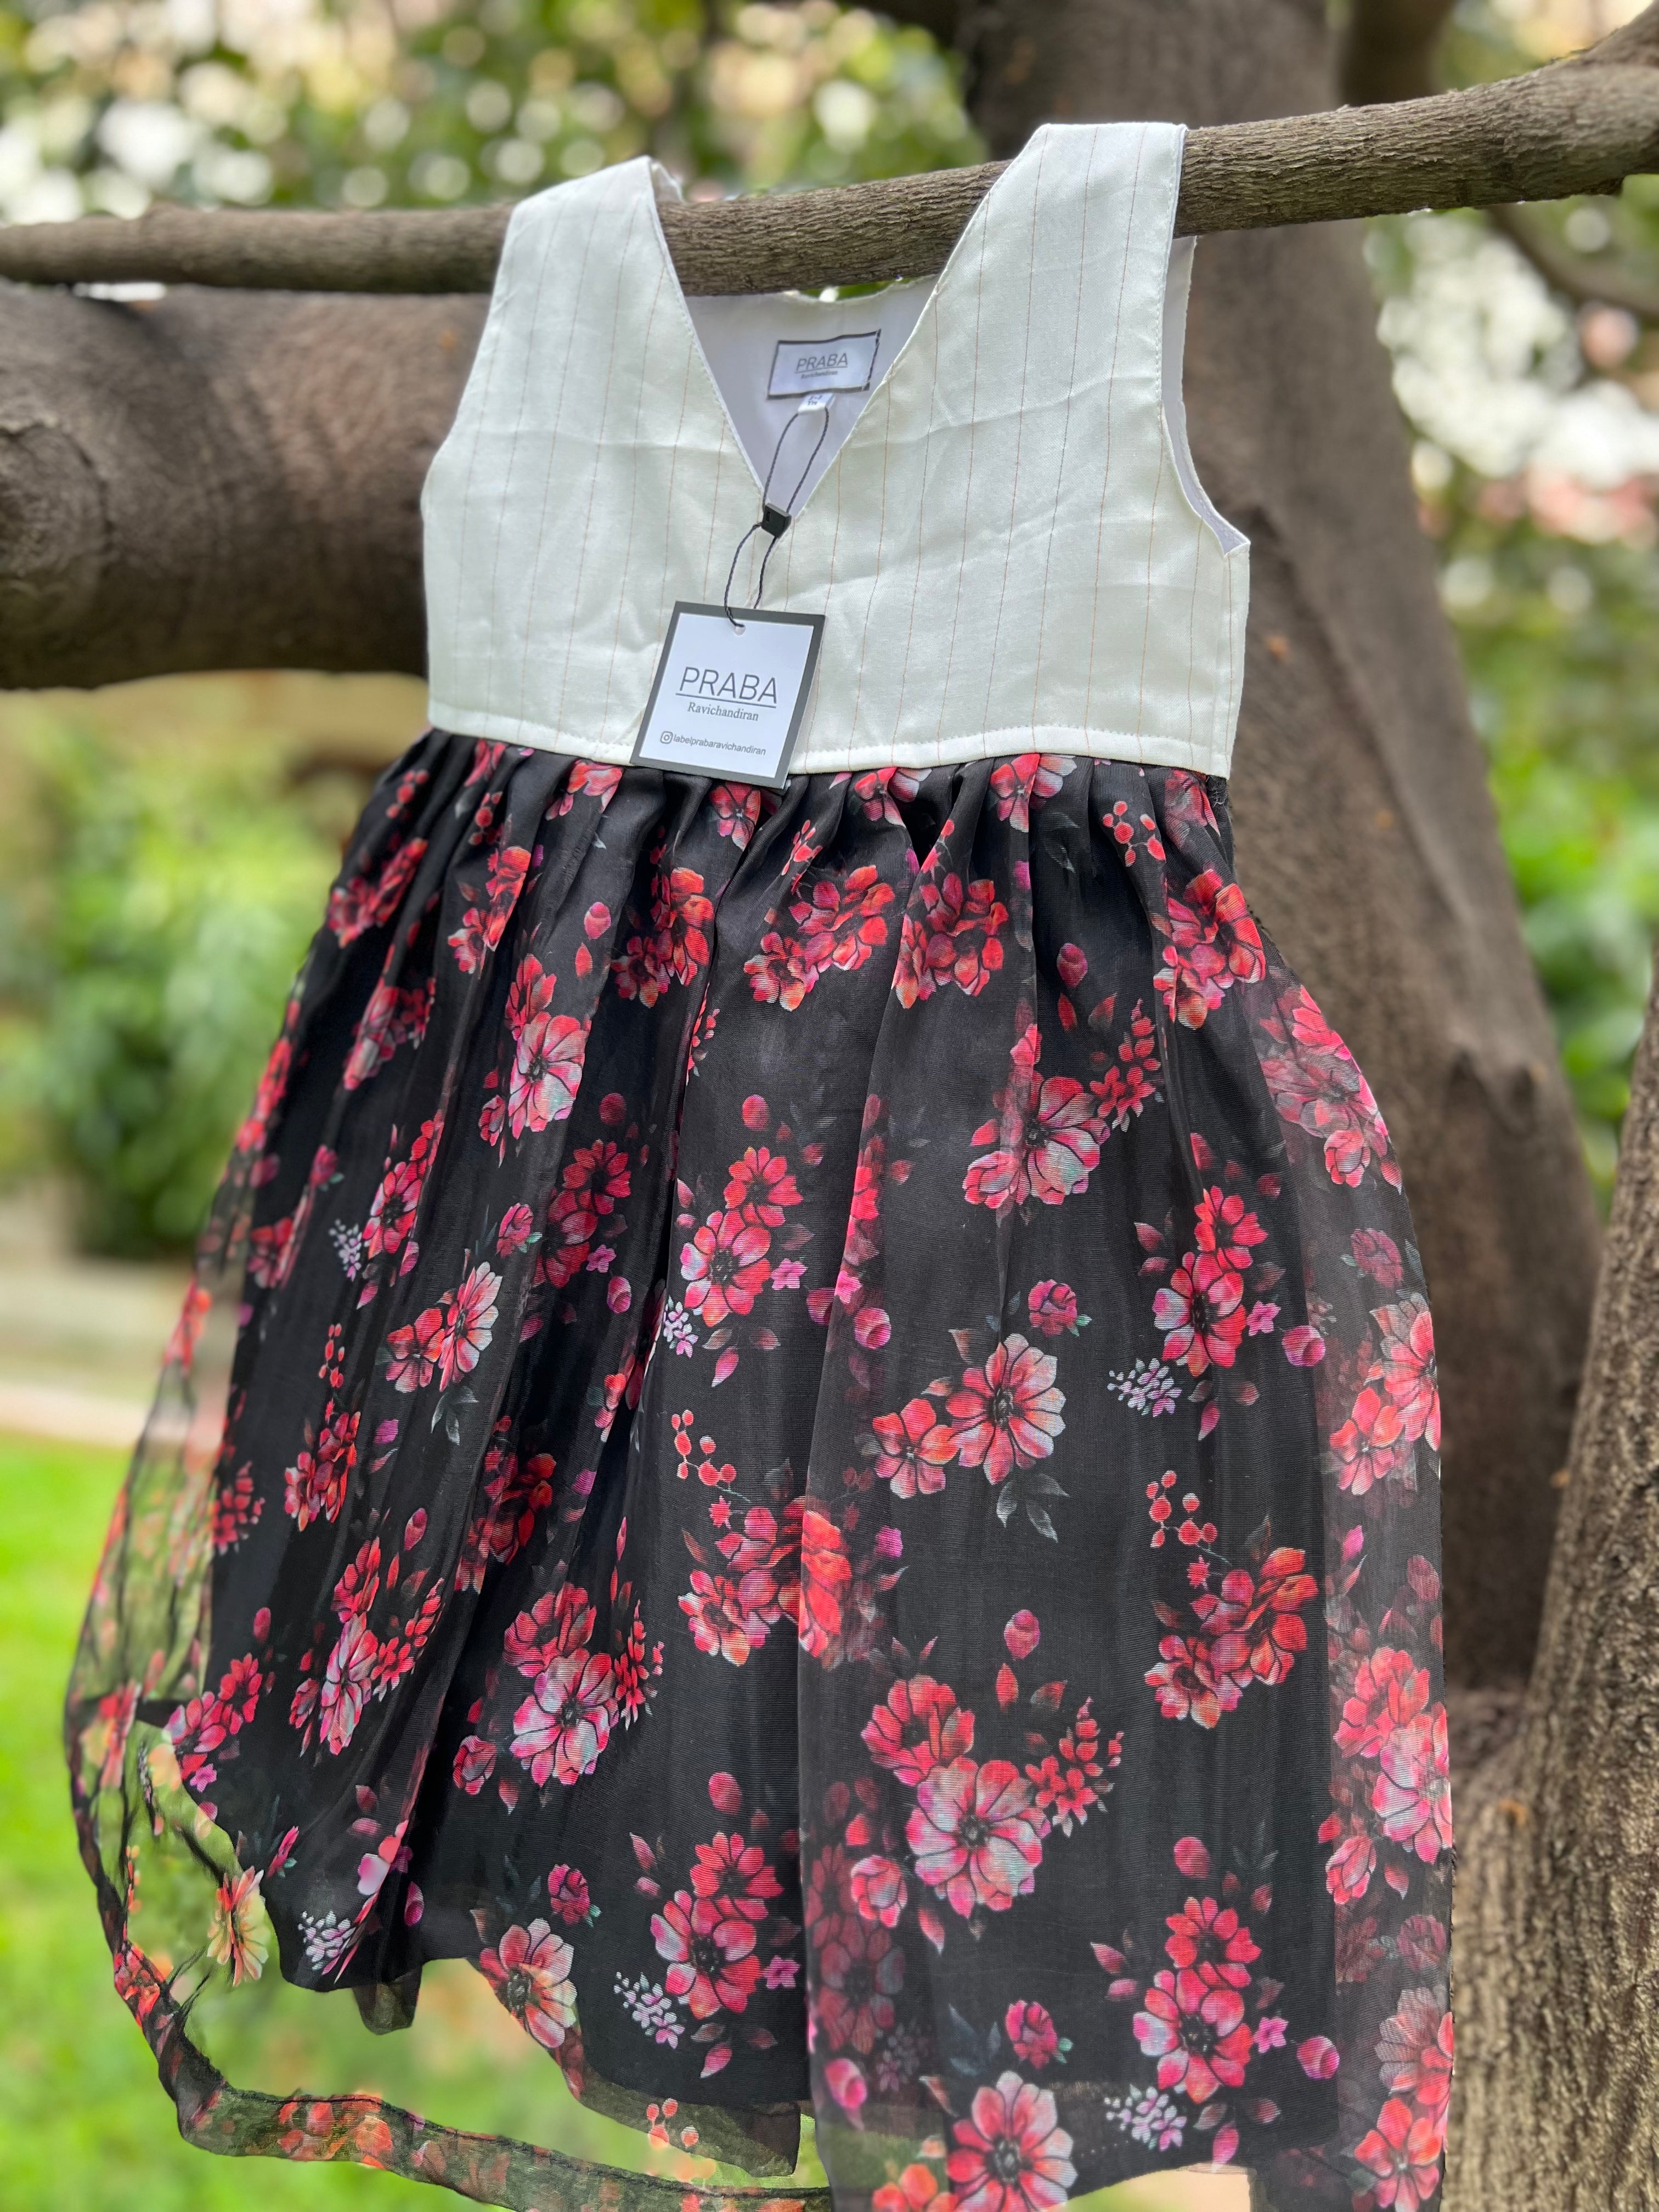 Black and white organza floral frock